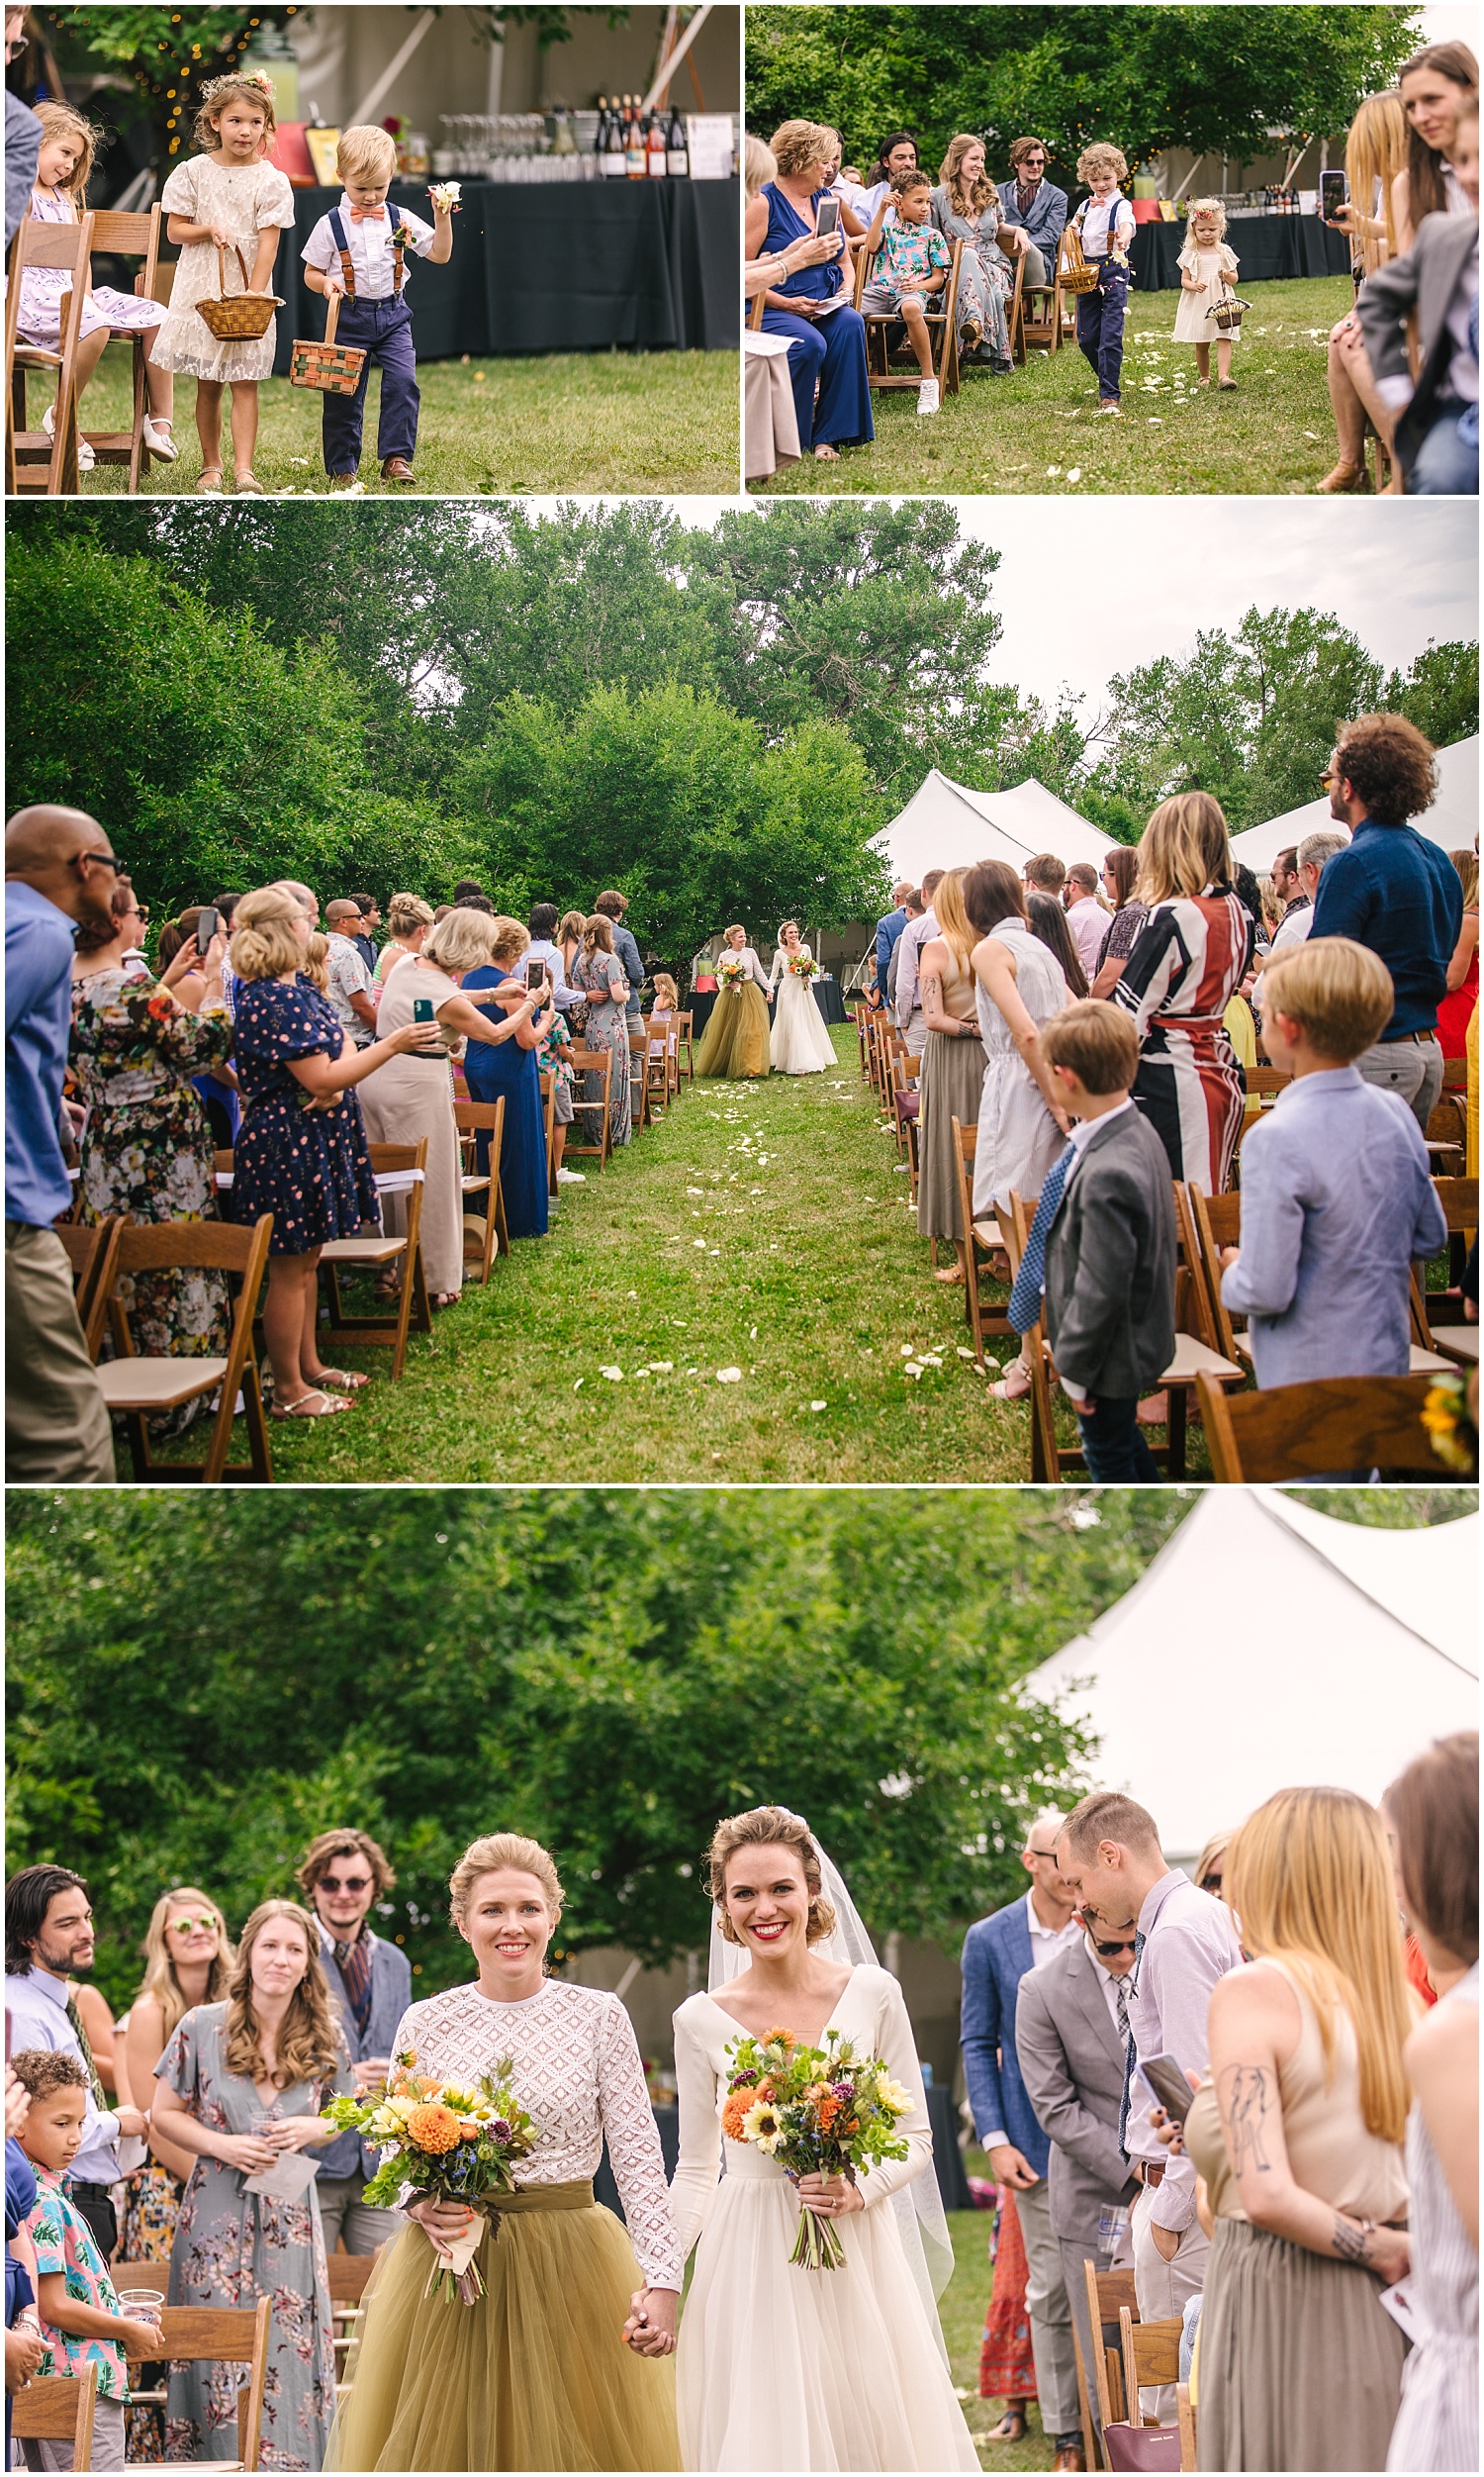 Two brides make their entrance following flower children at their Pastures of Plenty wedding ceremony